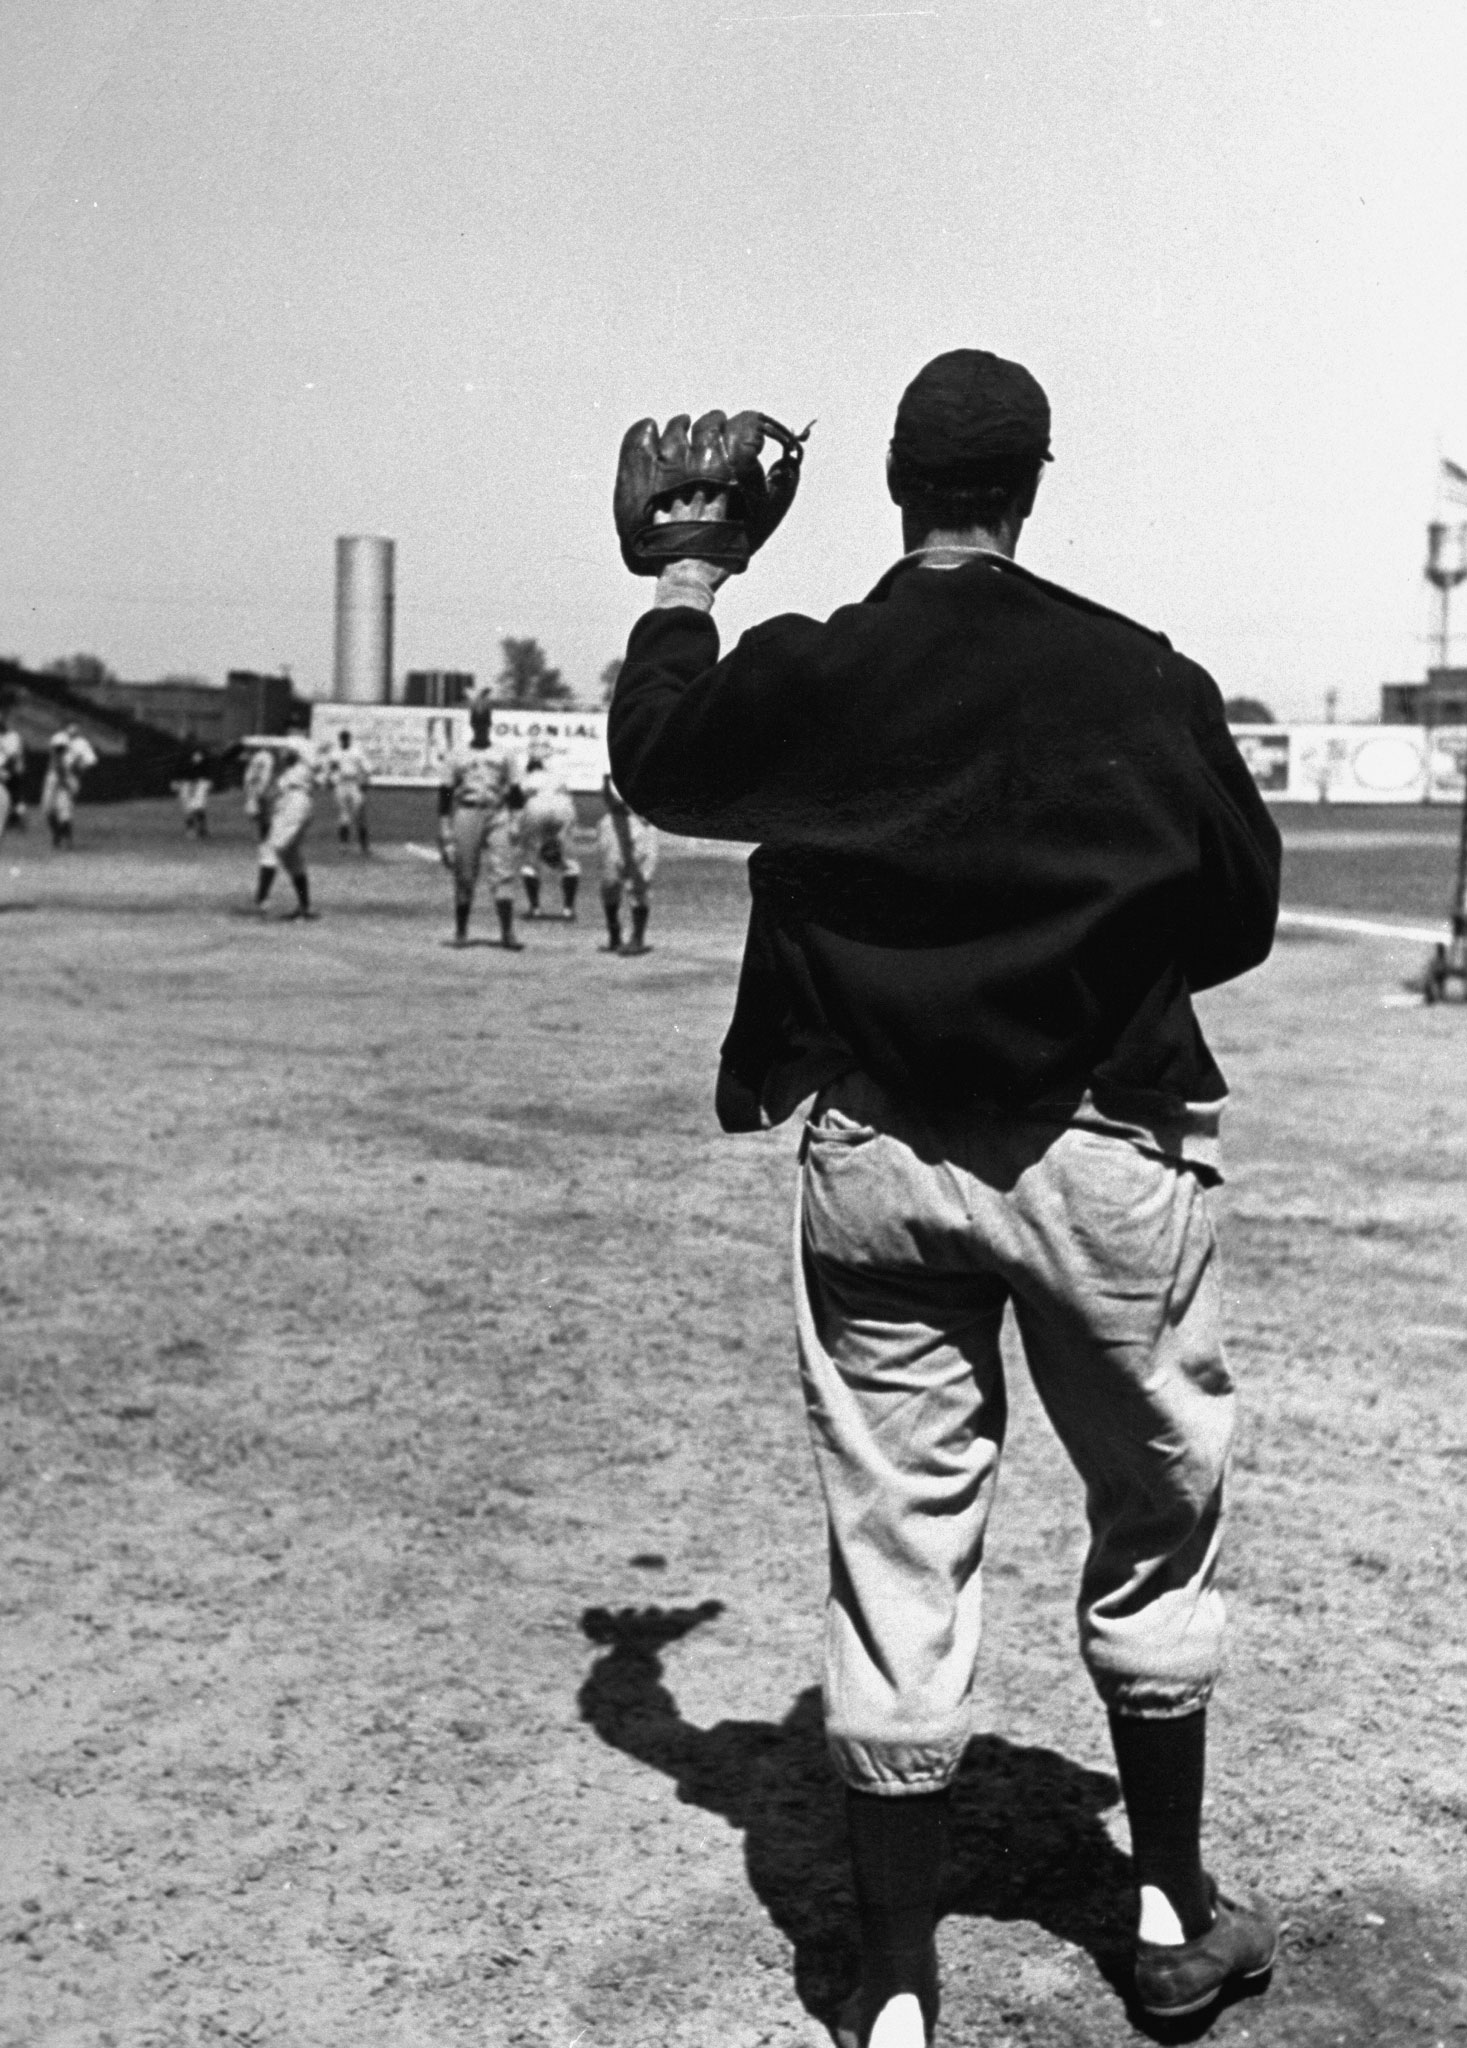 Joe DiMaggio playing catch during warm-up before game vs. the Dodgers, 1939.